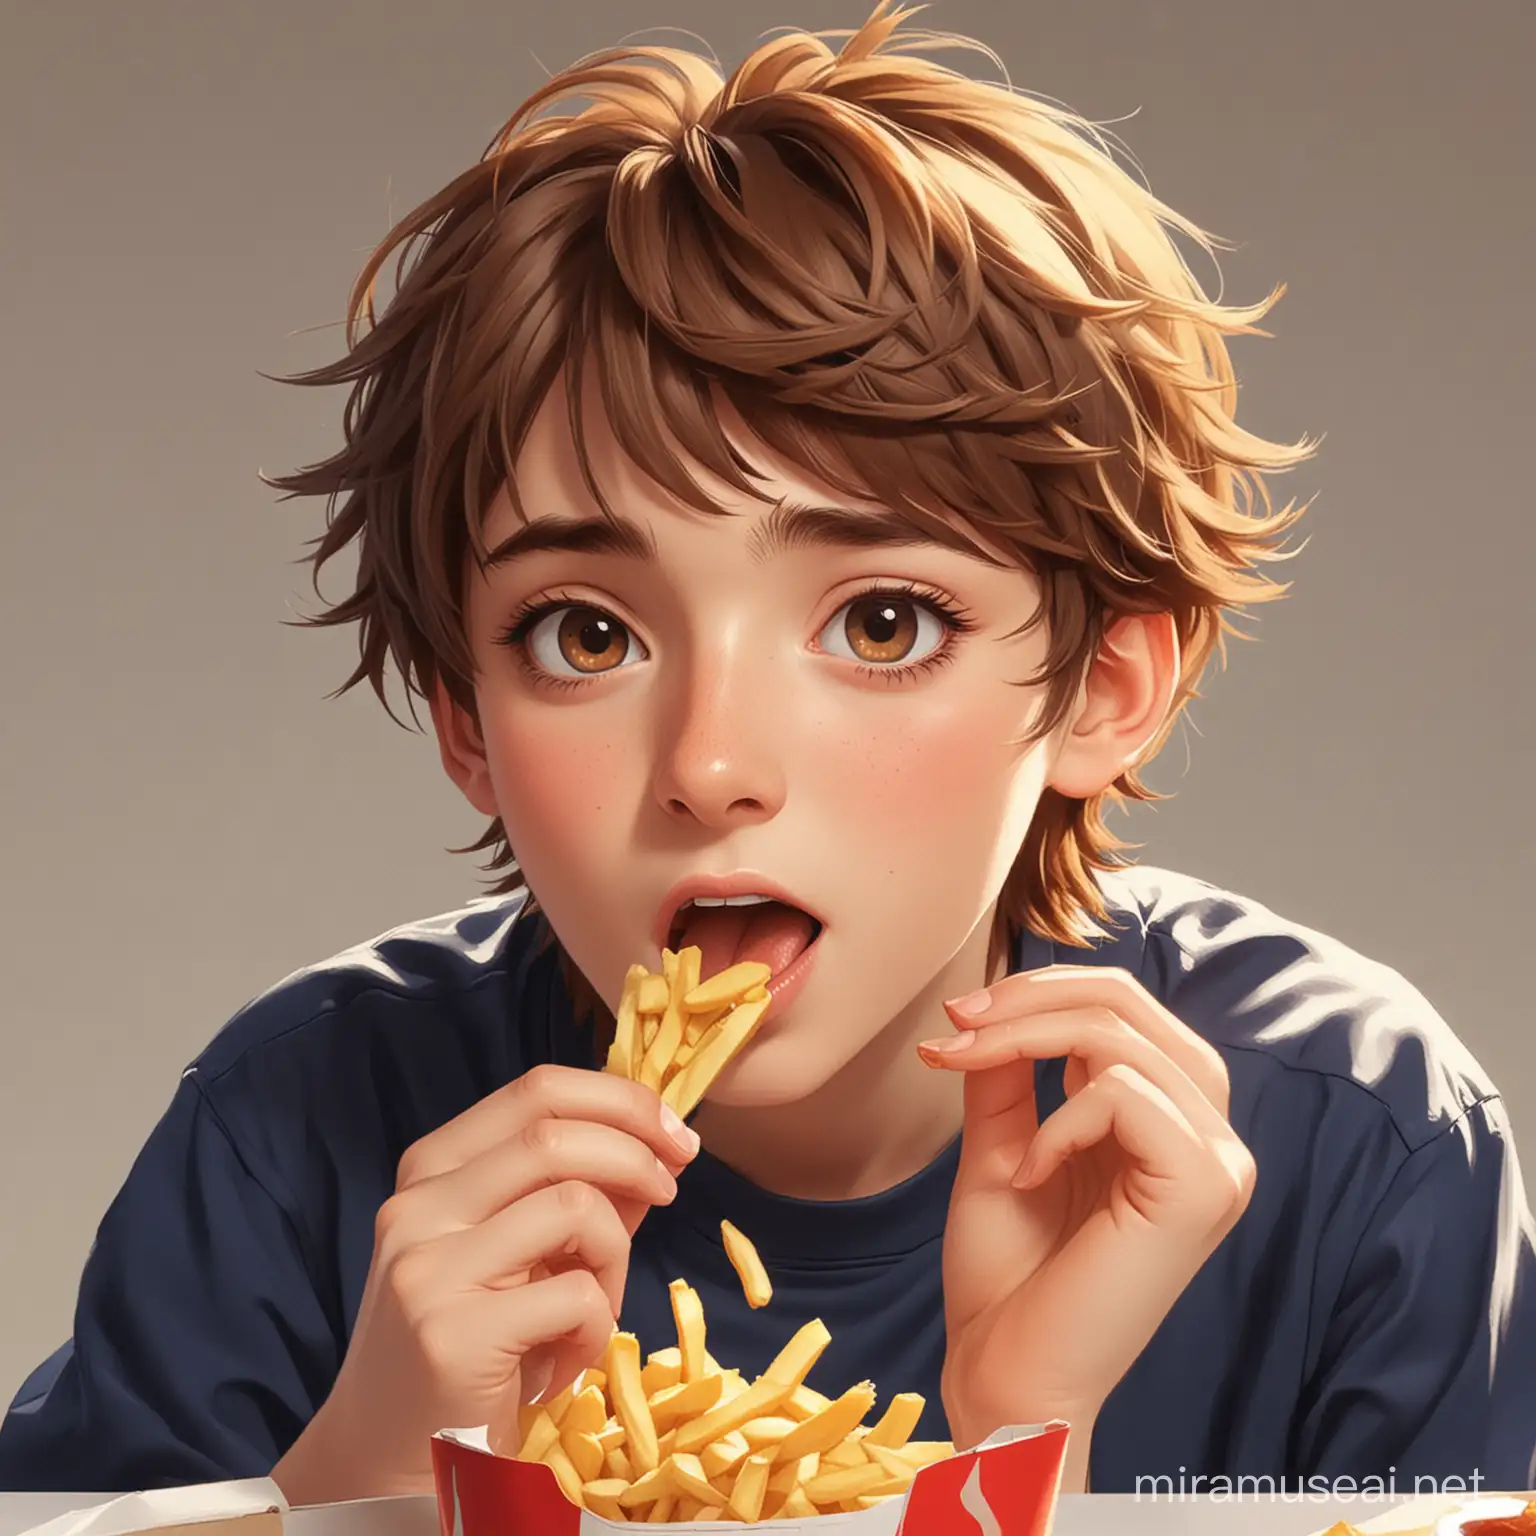 Anime Style BrownHaired Boy Enjoying French Fries